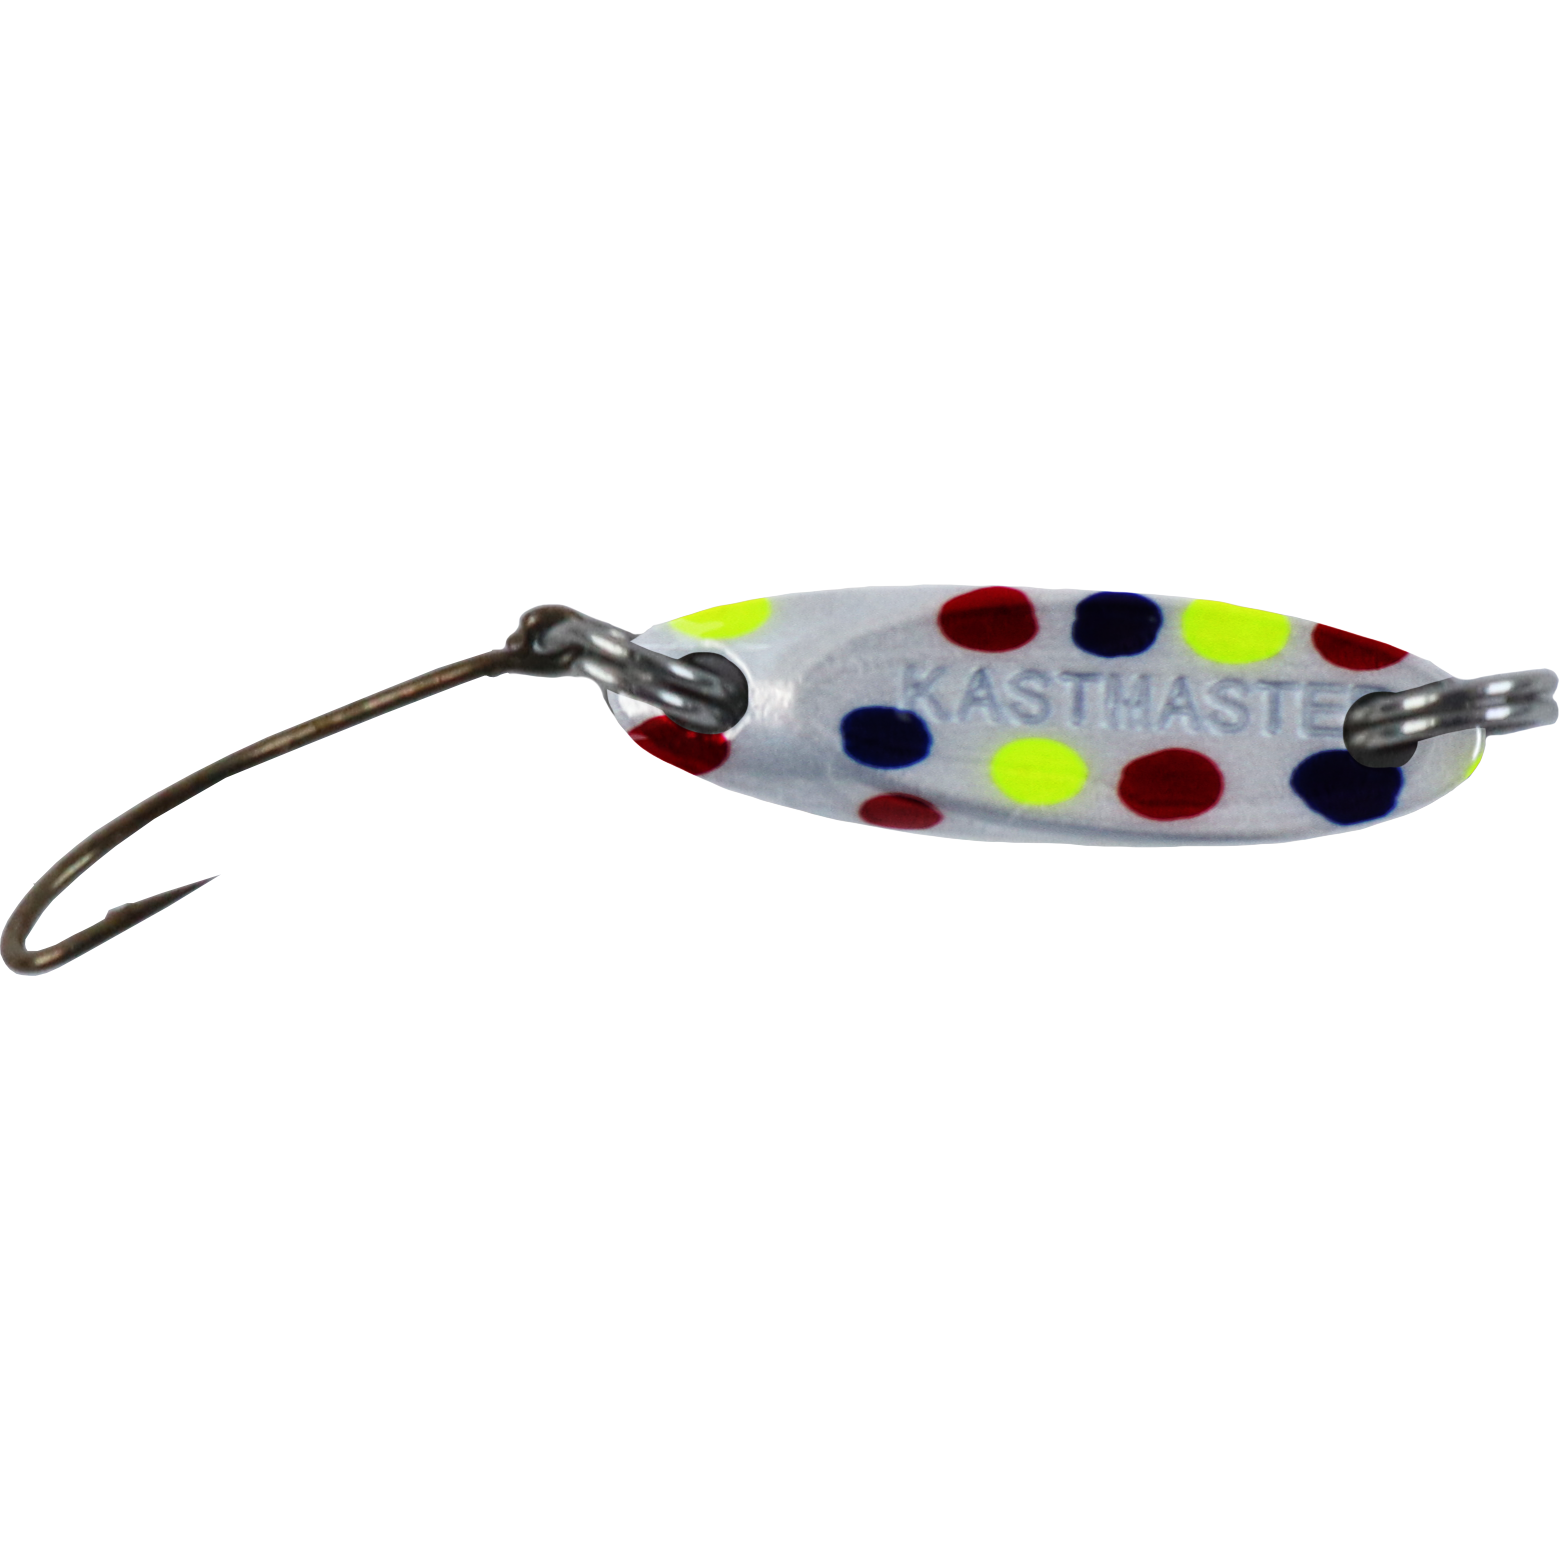 Acme Tackle - Acme Kastmaster Tungsten Ms Micro Series - Acme